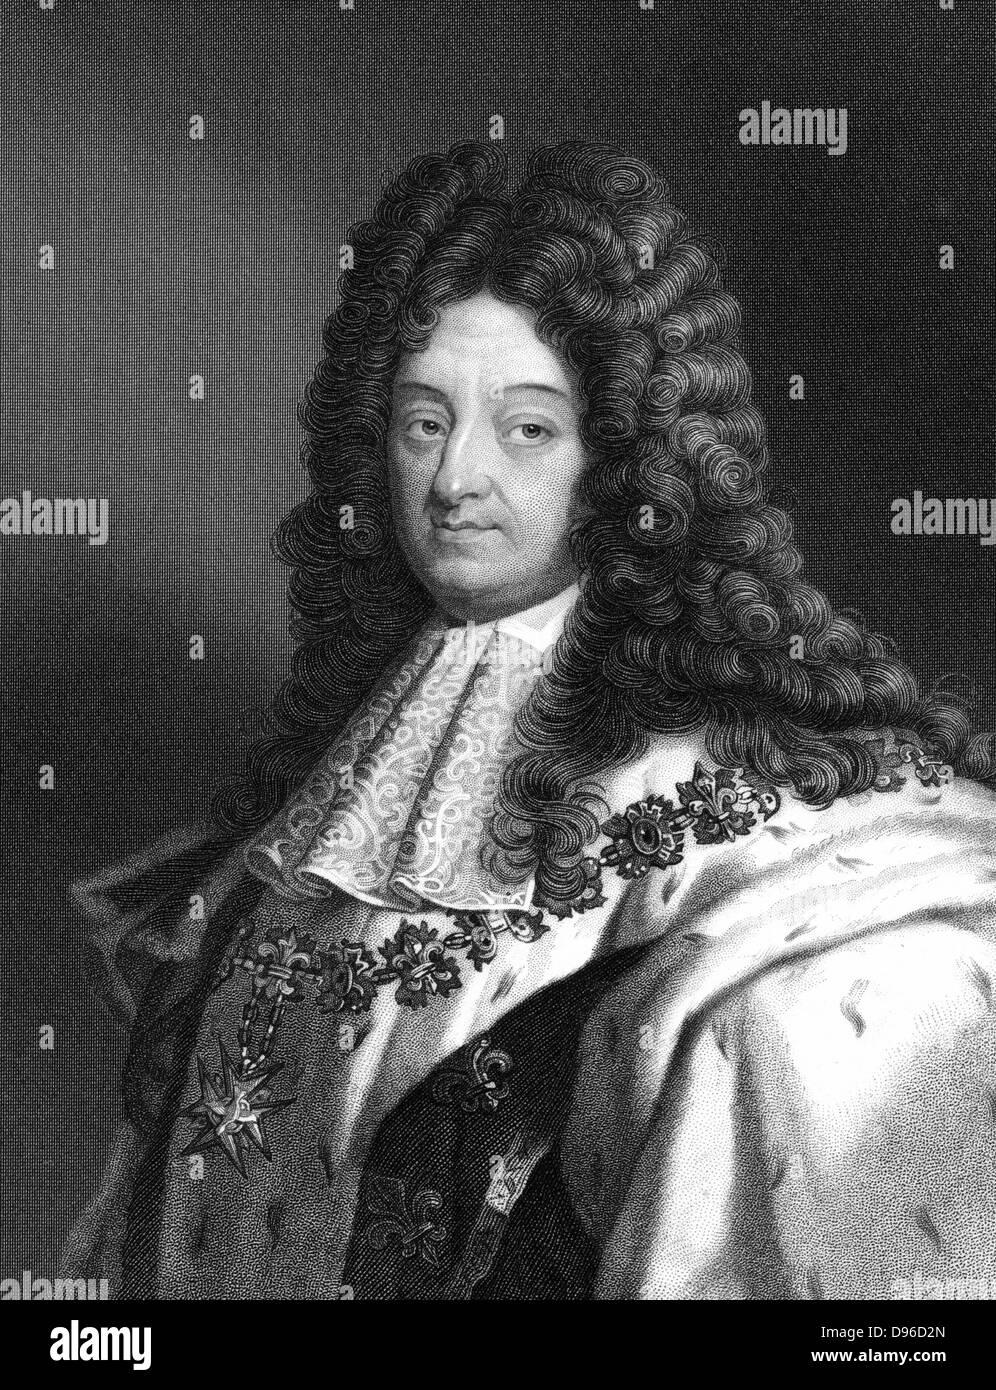 Louis XIV (1638-1715) king of France from 1643. Known as The Sun King (Le Roi Soleil). Engraving after portrait by Rigaud showing him wearing the Order of St Esprit. Stock Photo